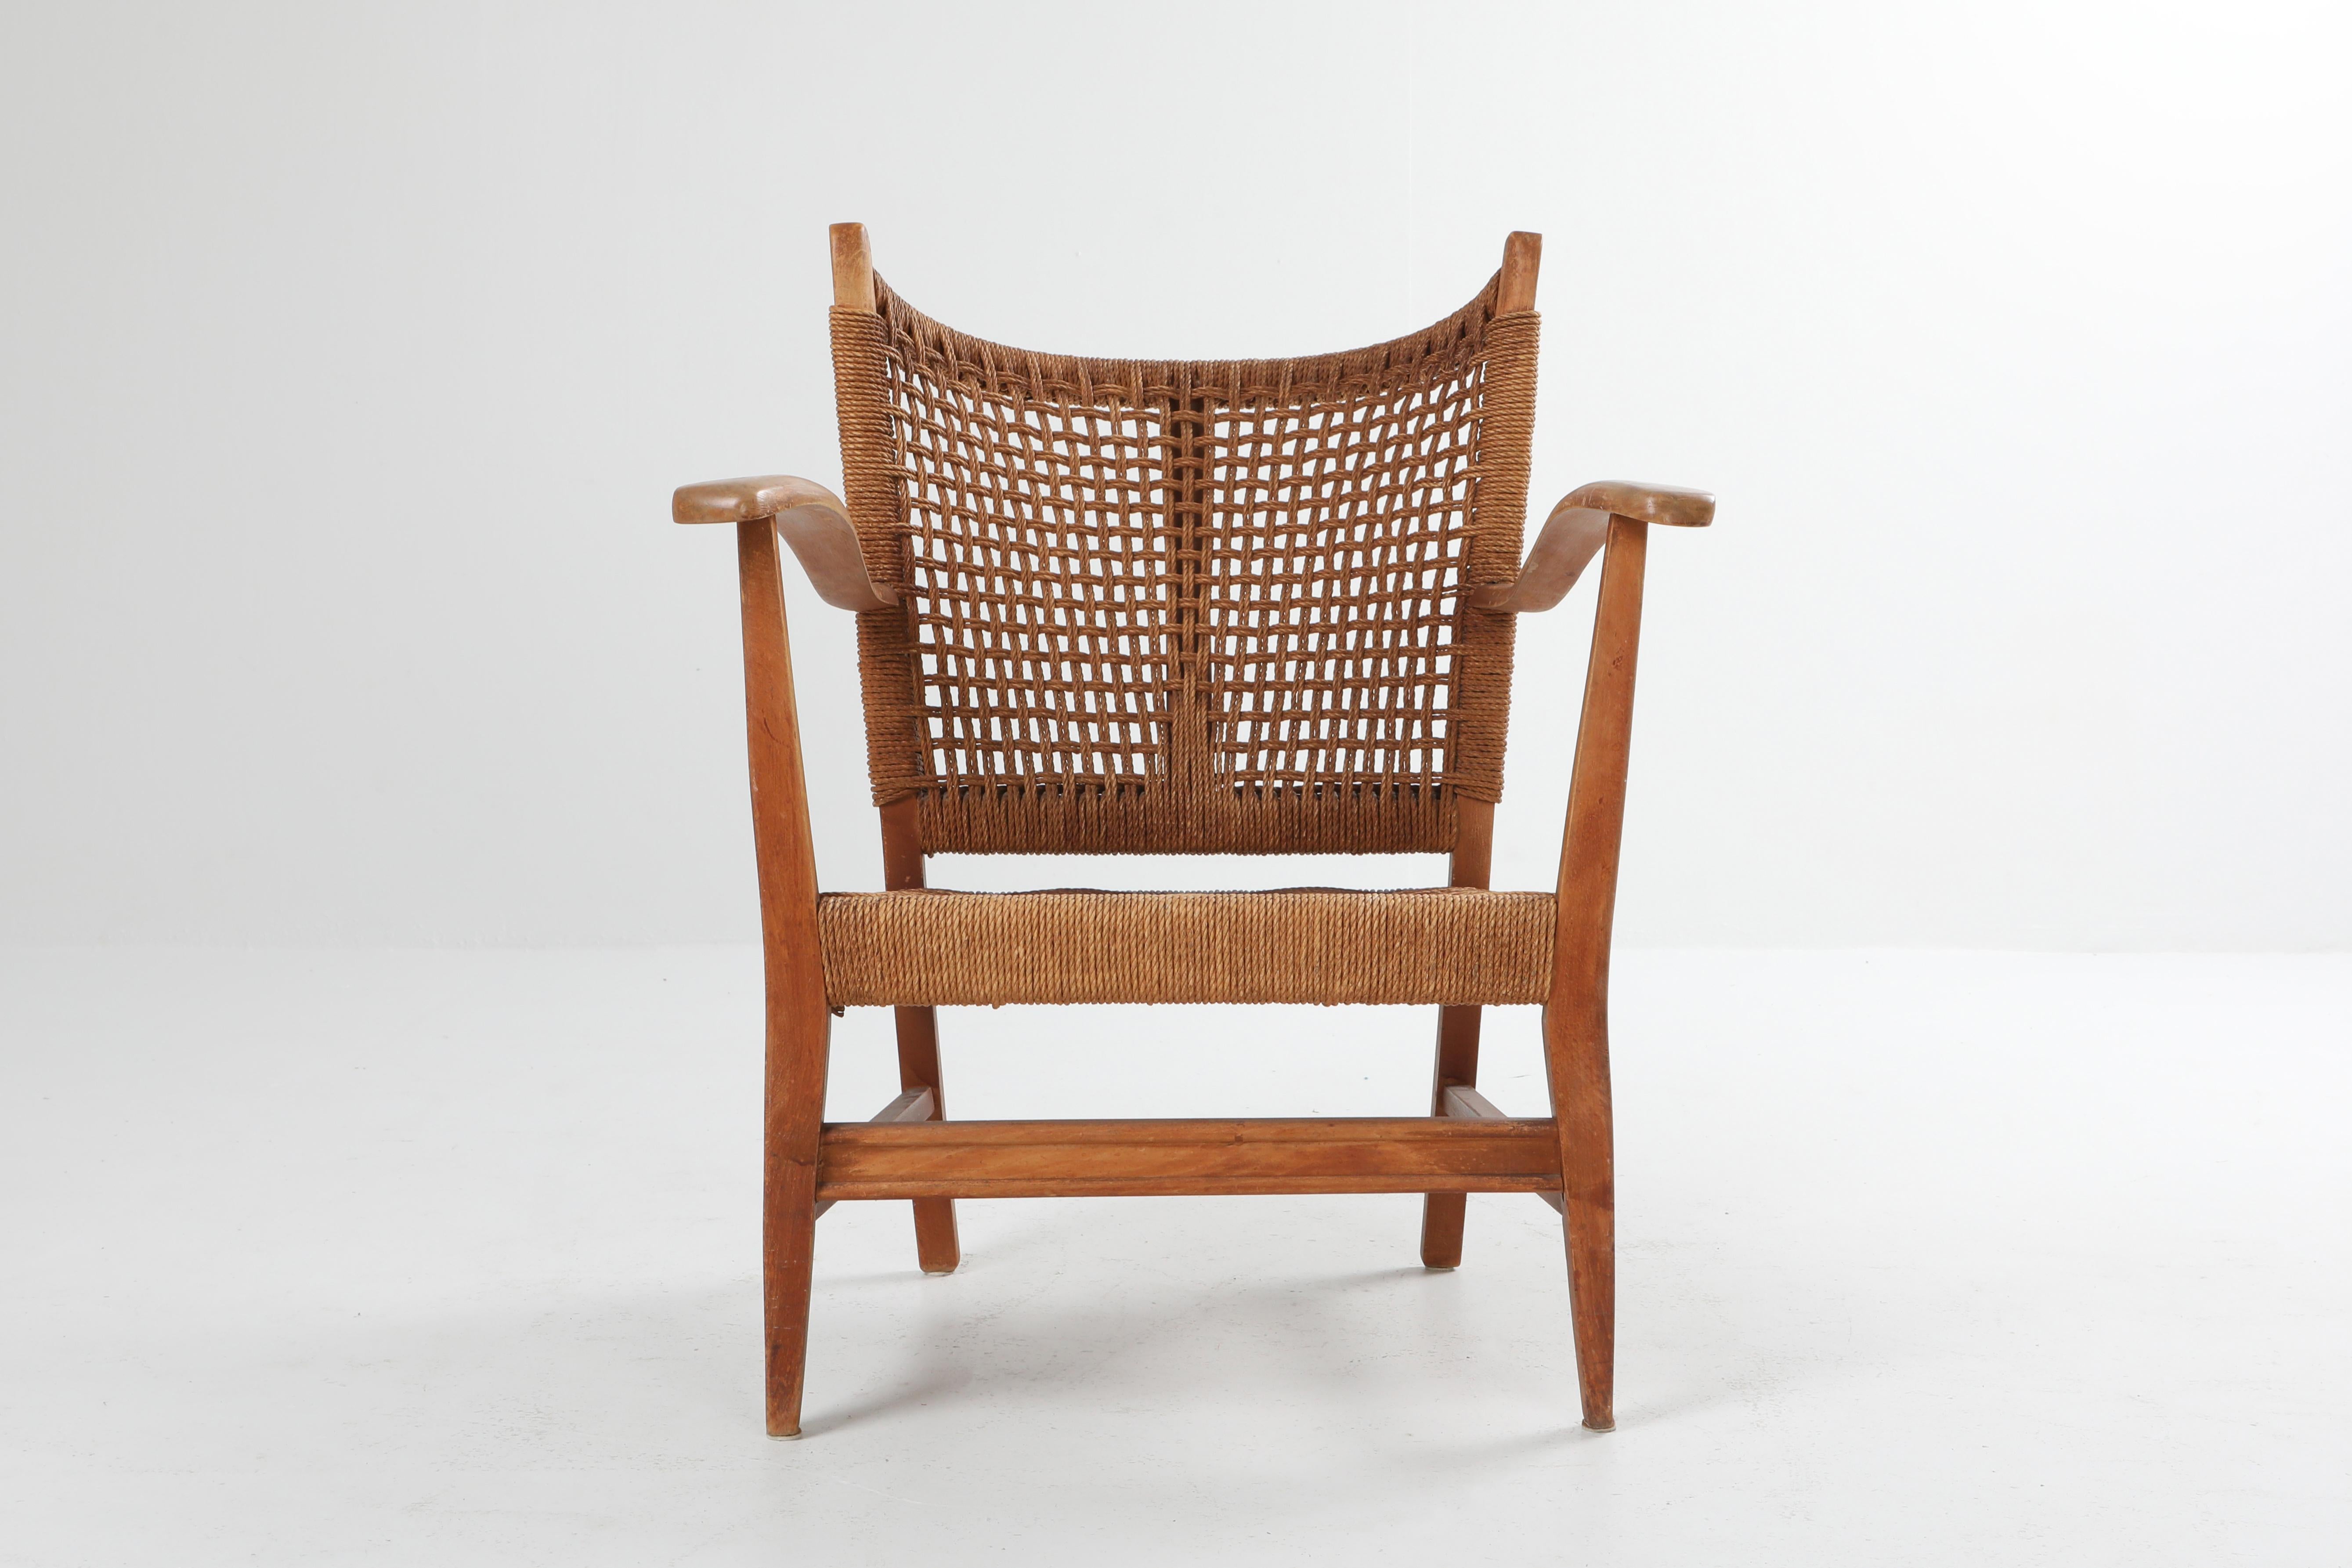 Bast Van Pelt, oak and cord armchairs, The Netherlands, 1950s
Natural and elegant chairs from the 1950s in oak and cord. Stylisticly referencing to French Art Deco and Scandinavian Modernism.